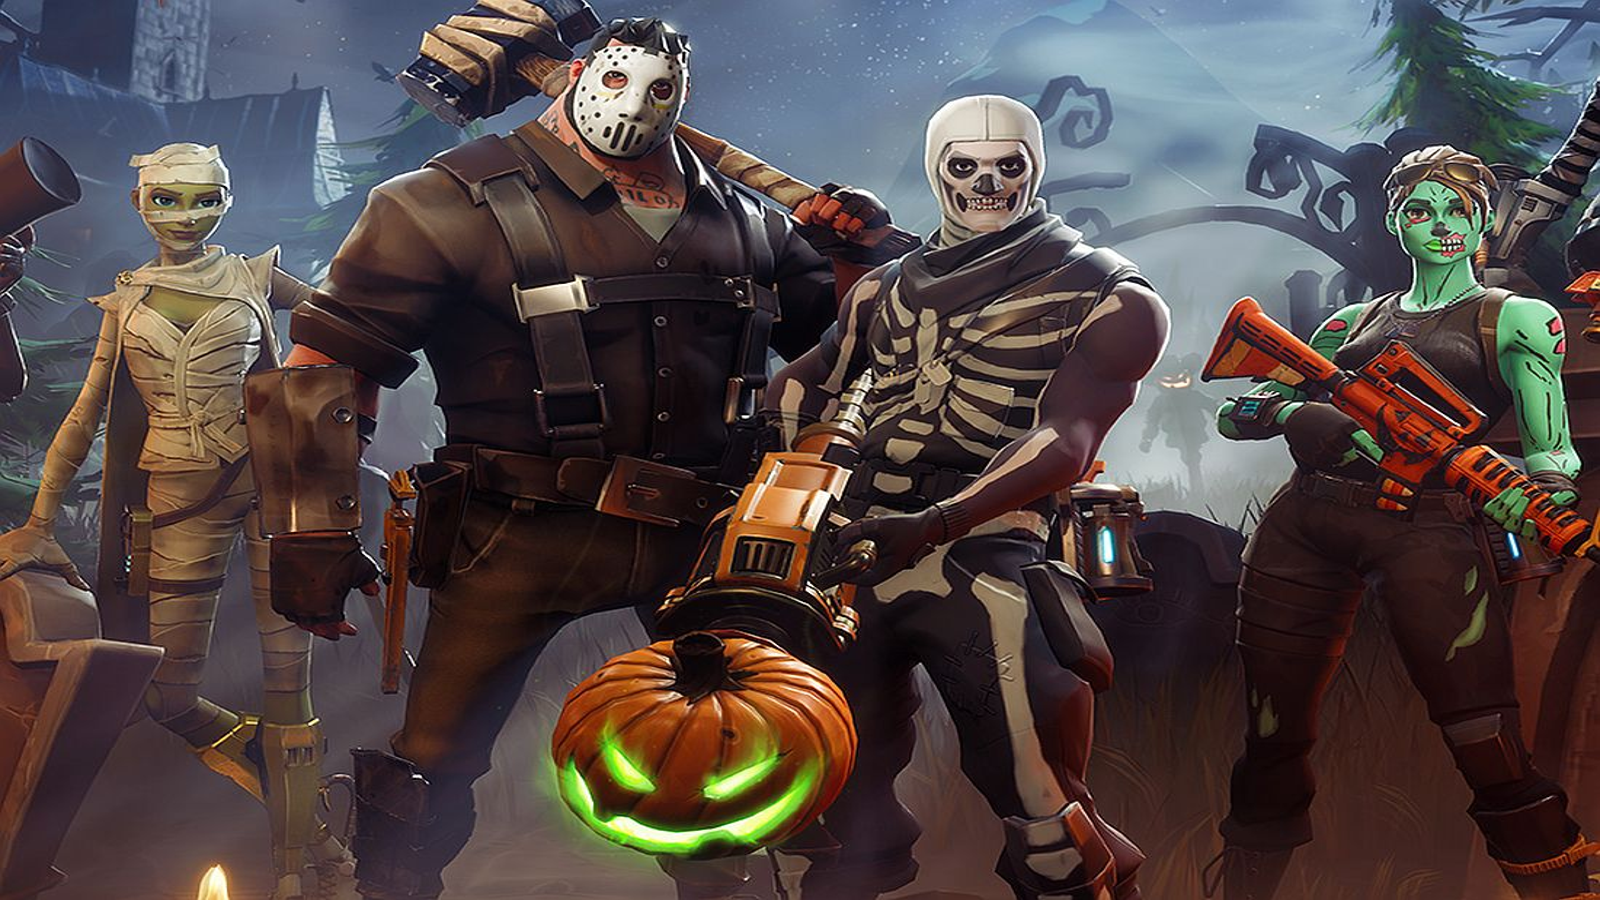 Get a Halloween treat with this code for free Vampire Survivors skins